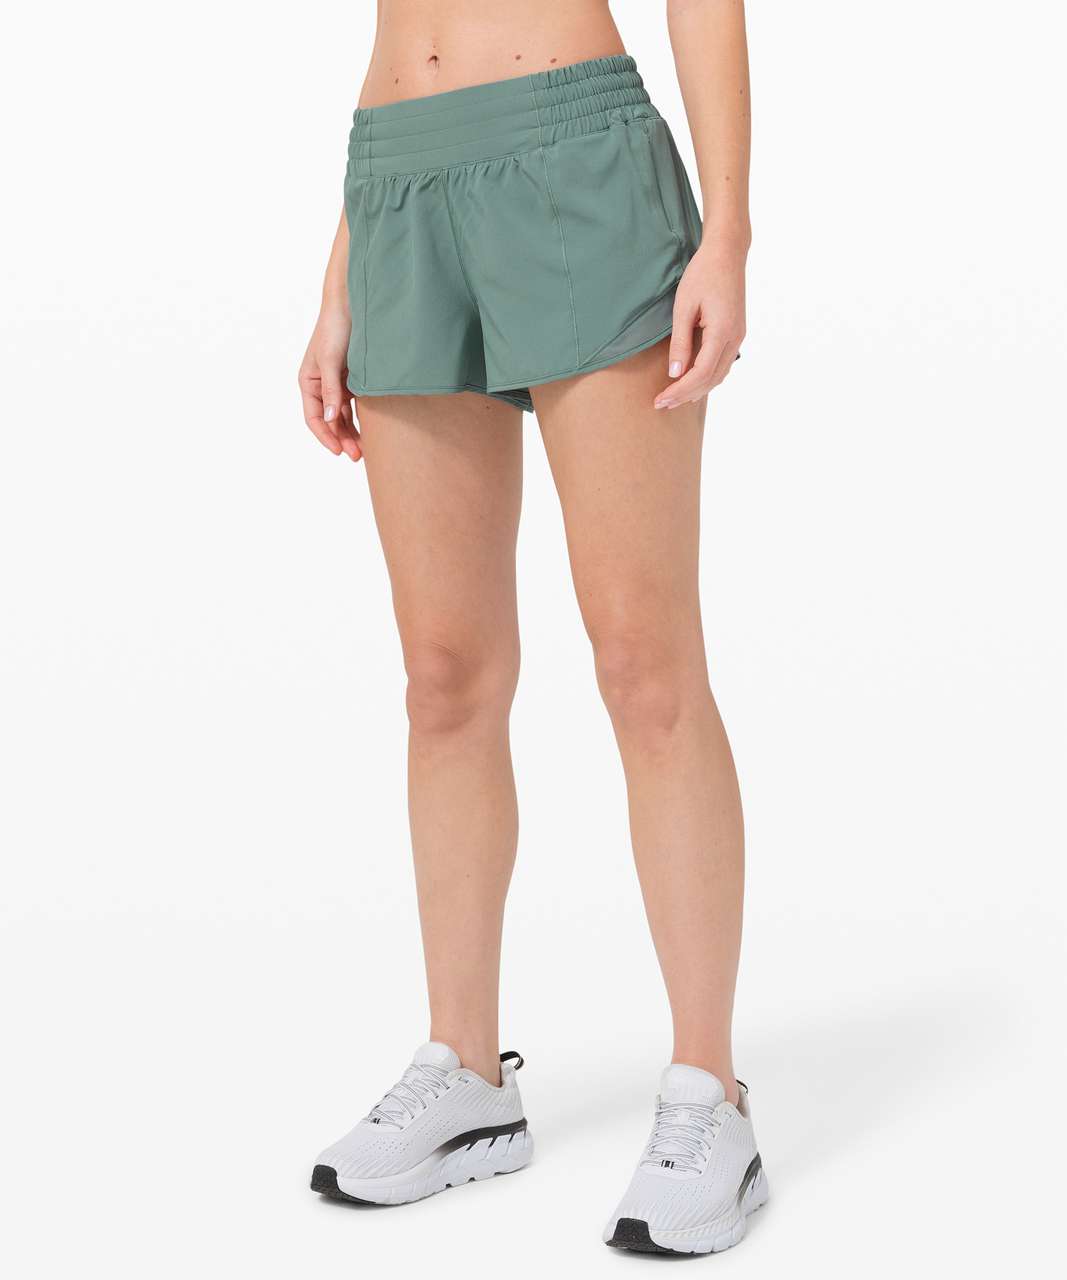 Lululemon Hotty Hot Low-Rise Lined Short 4 - No Limits White